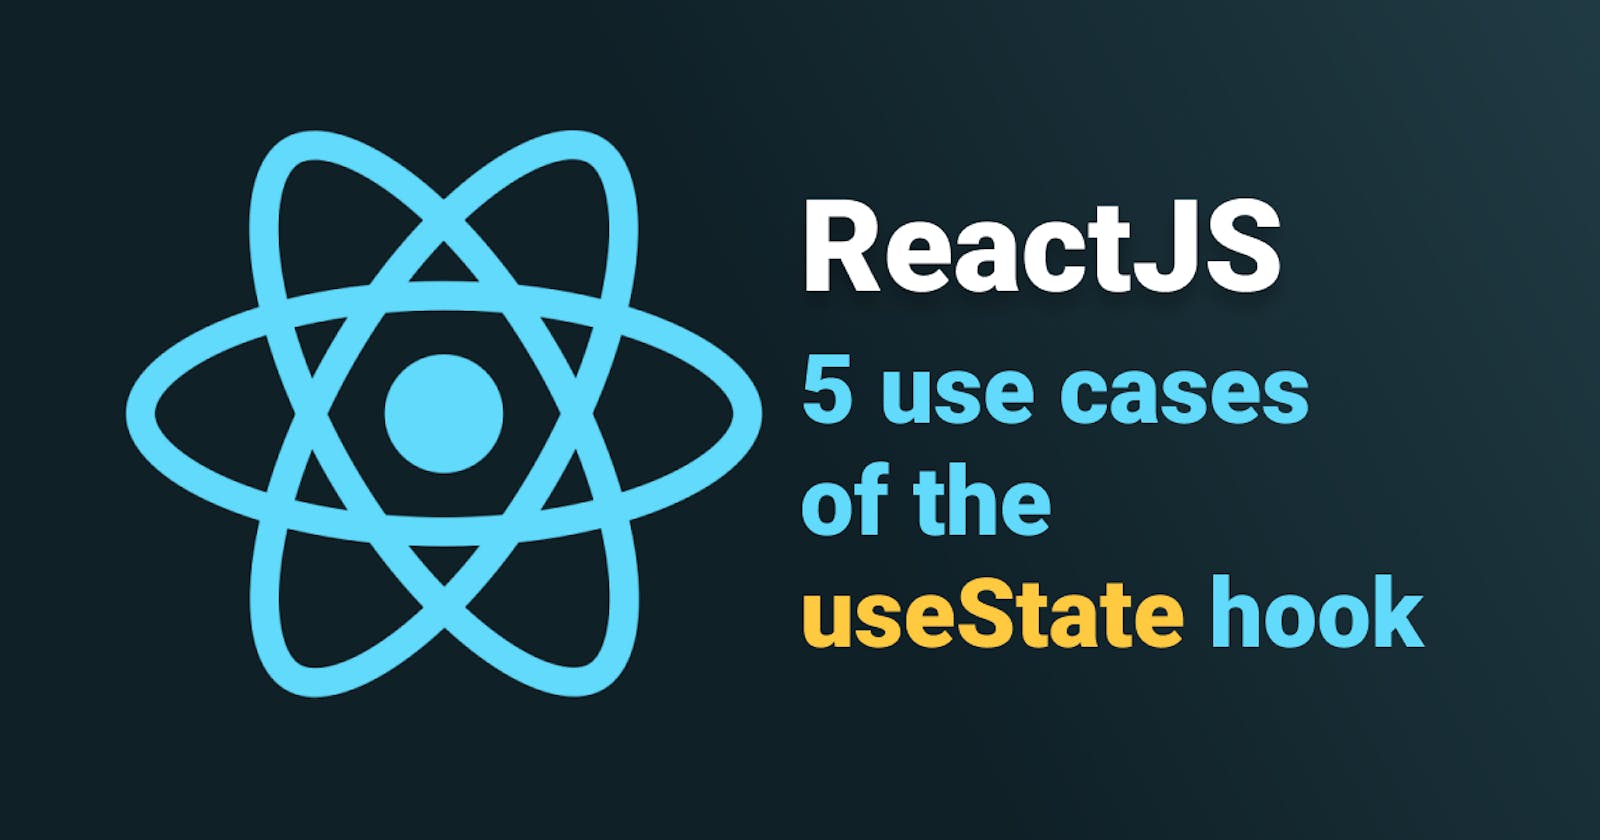 5 use cases of the useState ReactJS hook